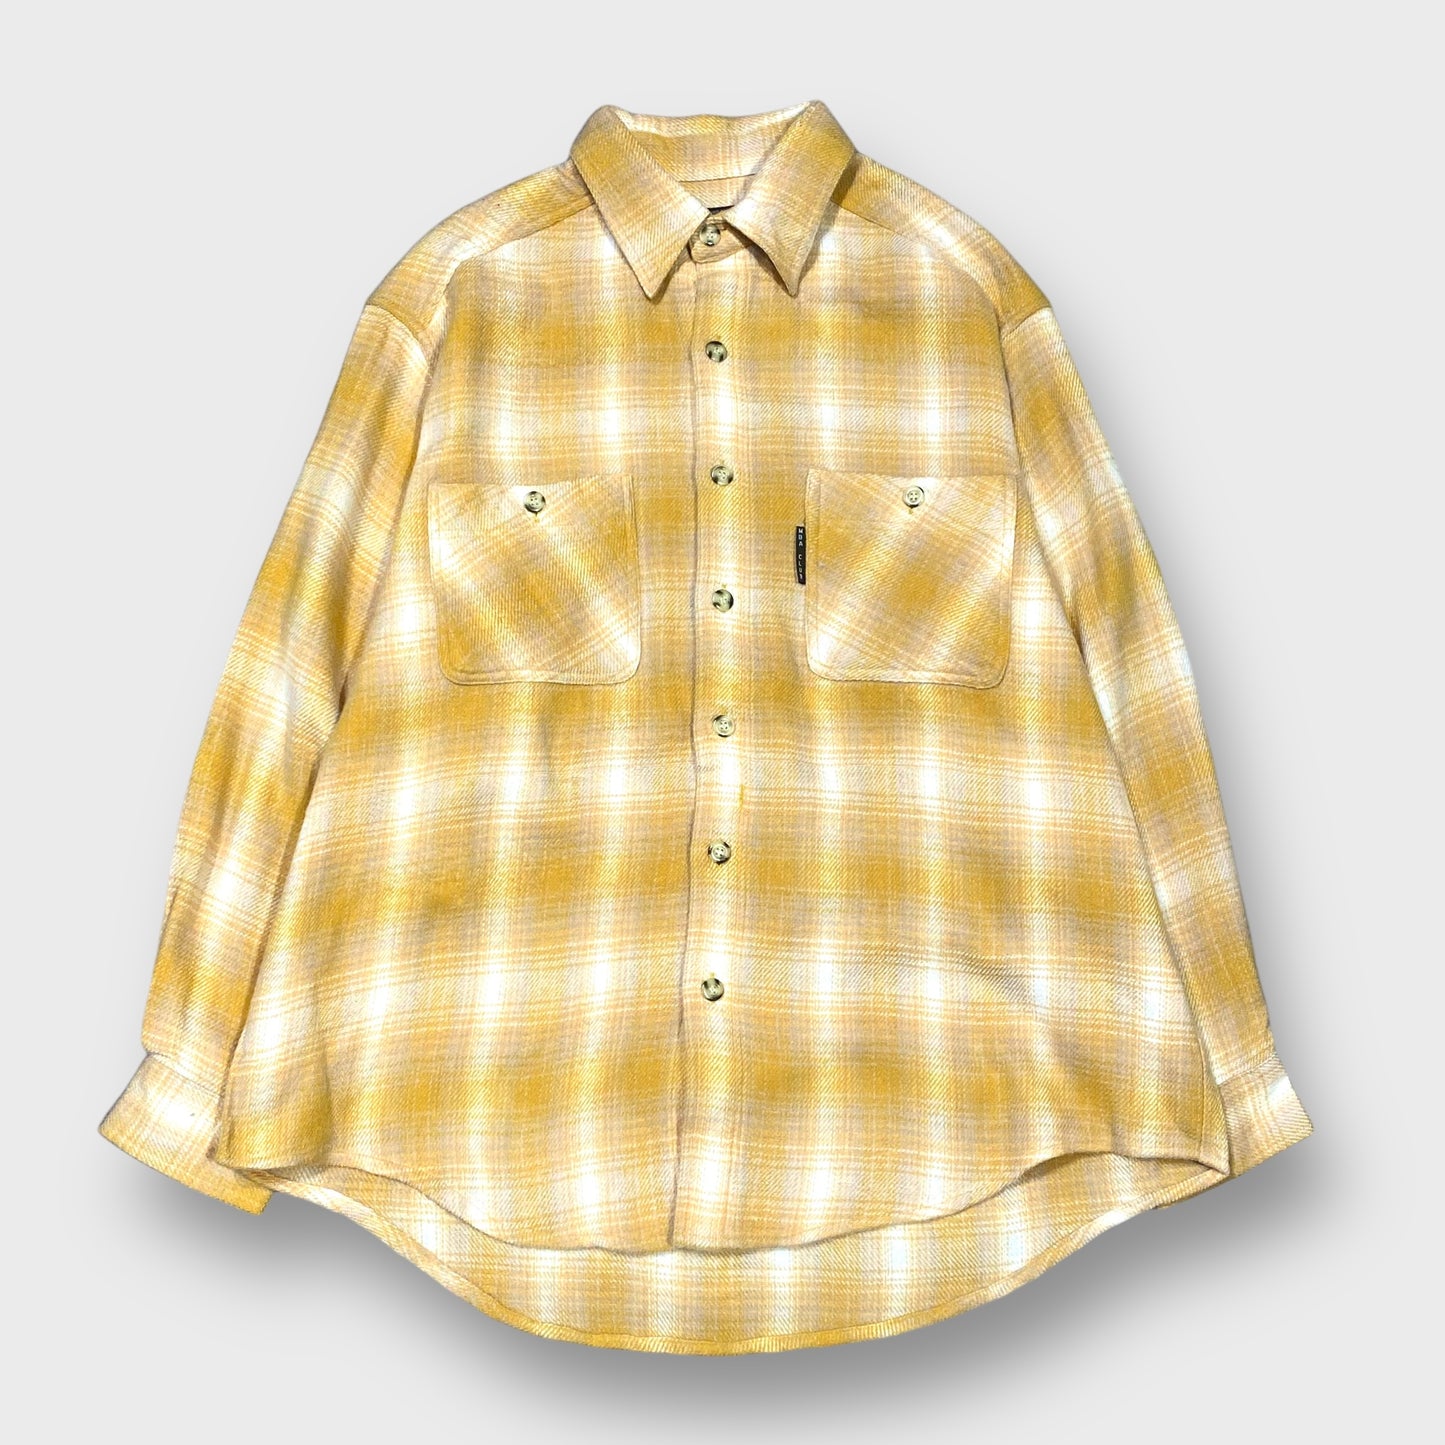 90's "MBA" Ombre check pattern heavy flannel shirt